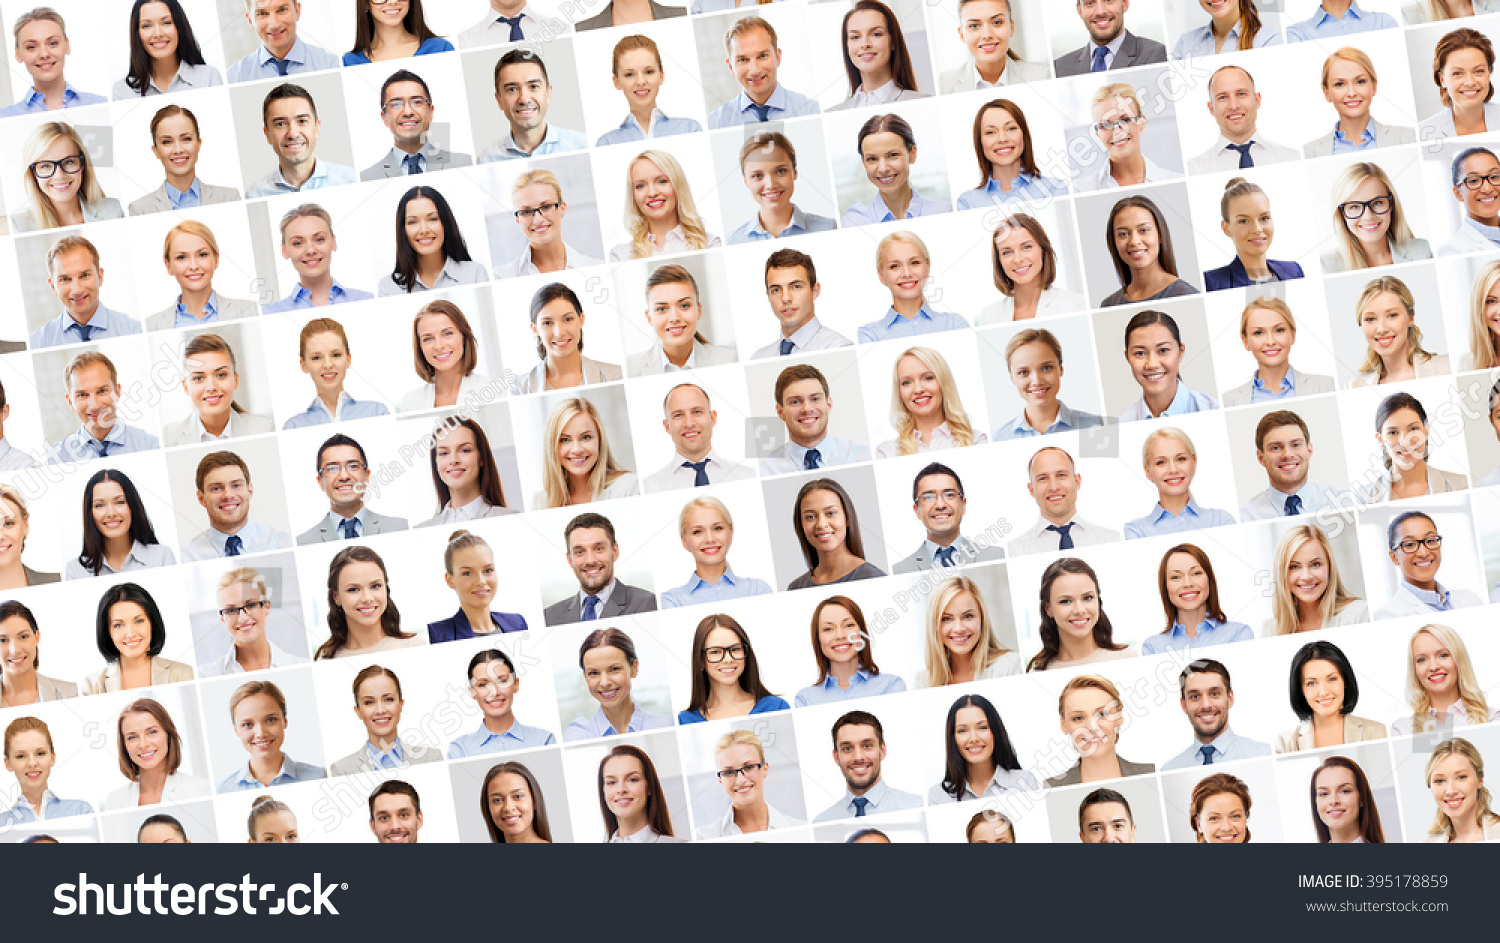 success concept - collage with many business people portraits #395178859